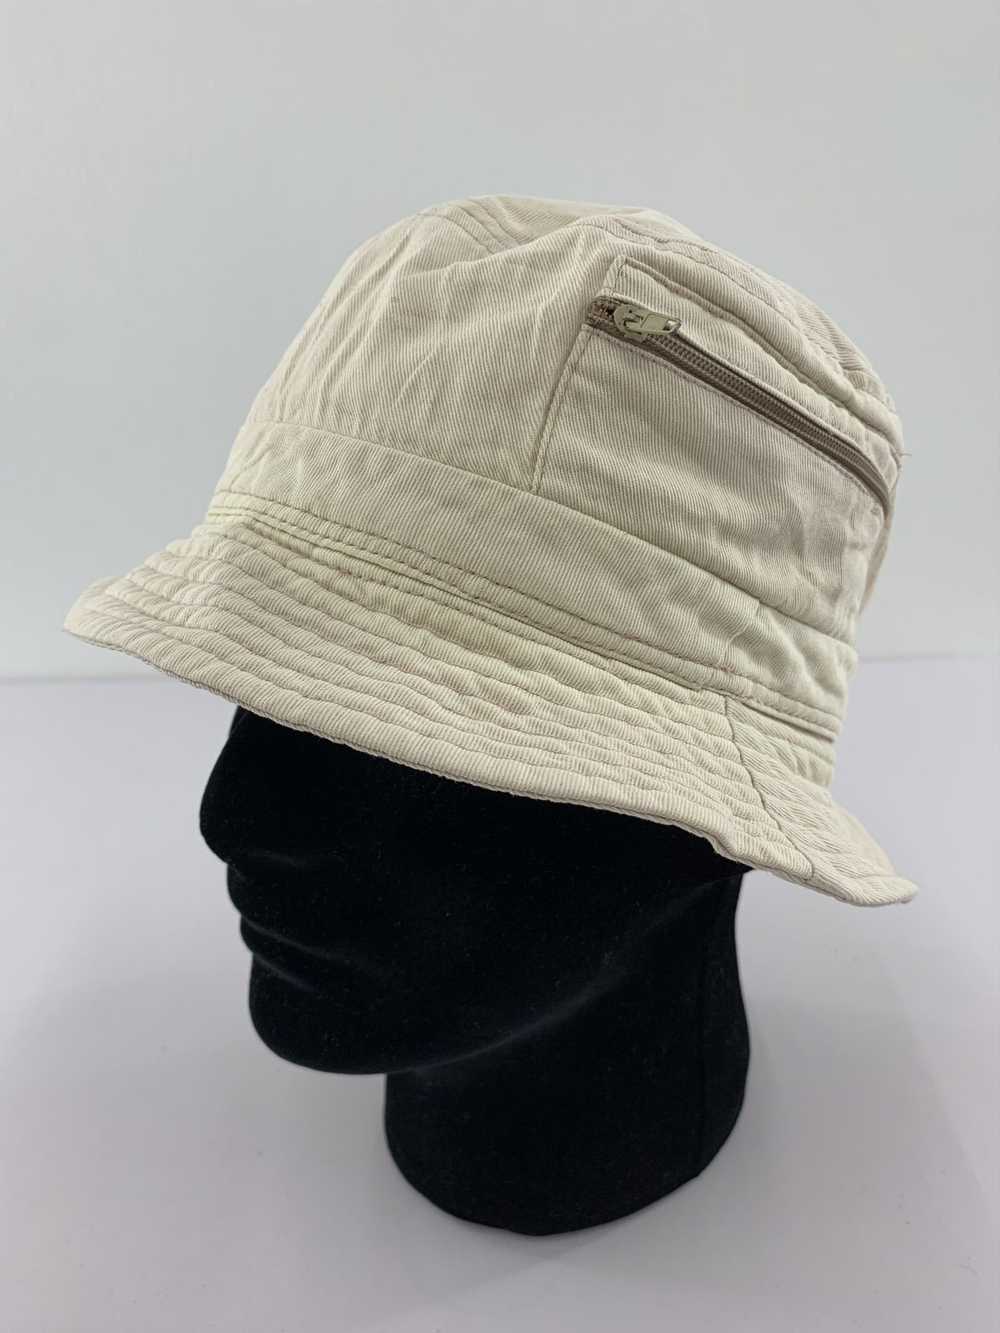 Hats × Other × Streetwear Unknown Bucket Hats Poc… - image 3